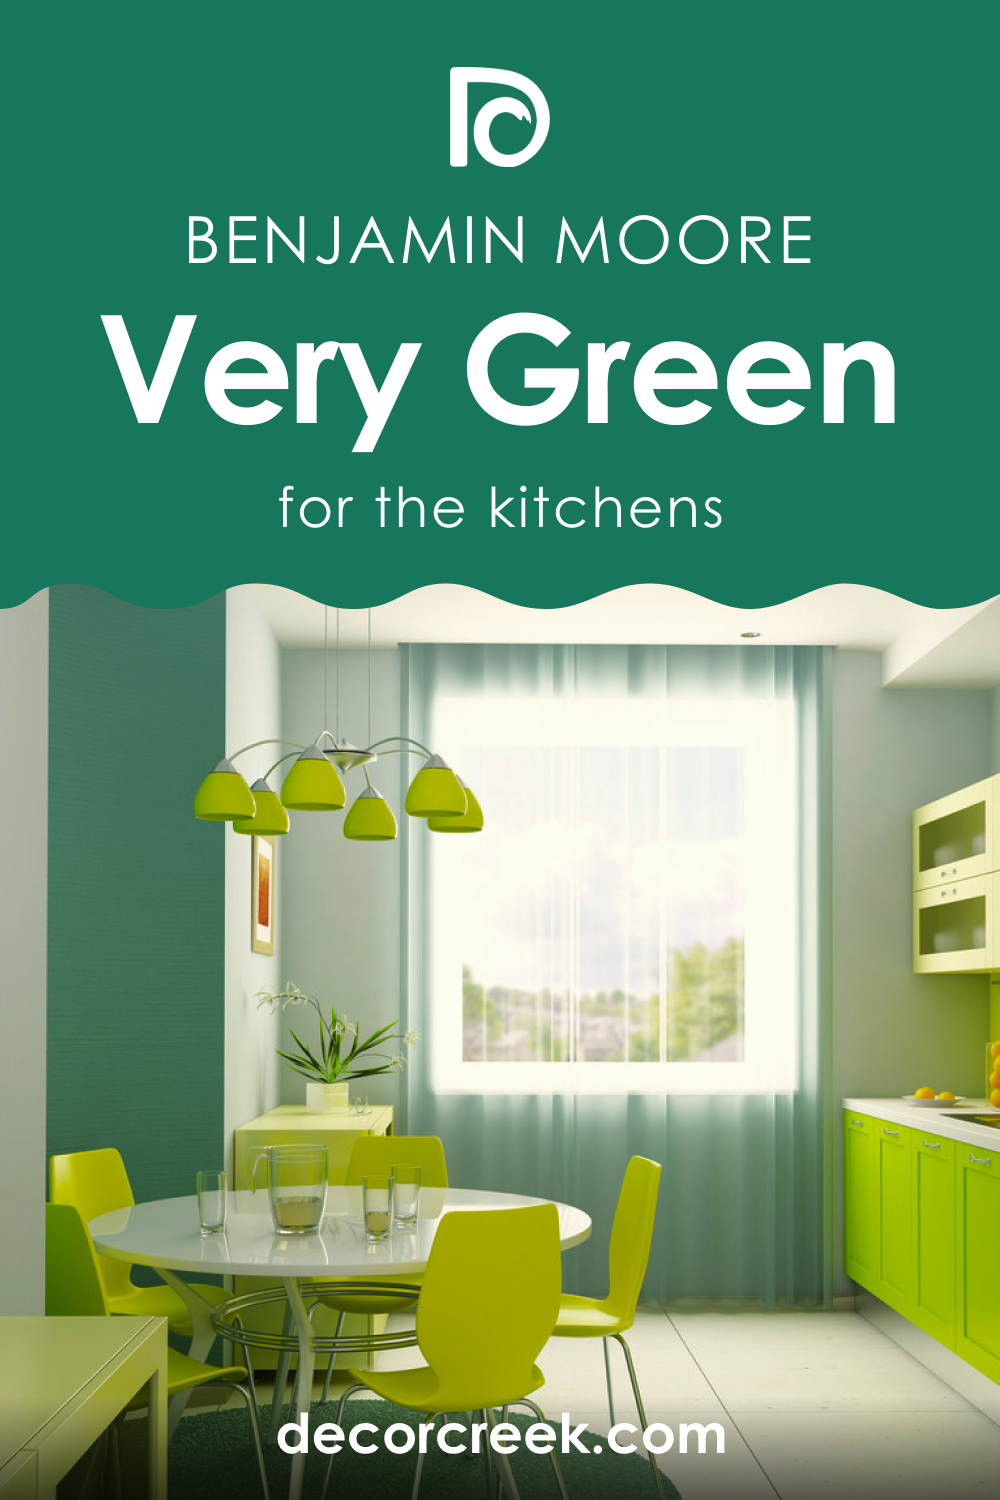 How to Use Very Green 2040-30 in the Kitchen?